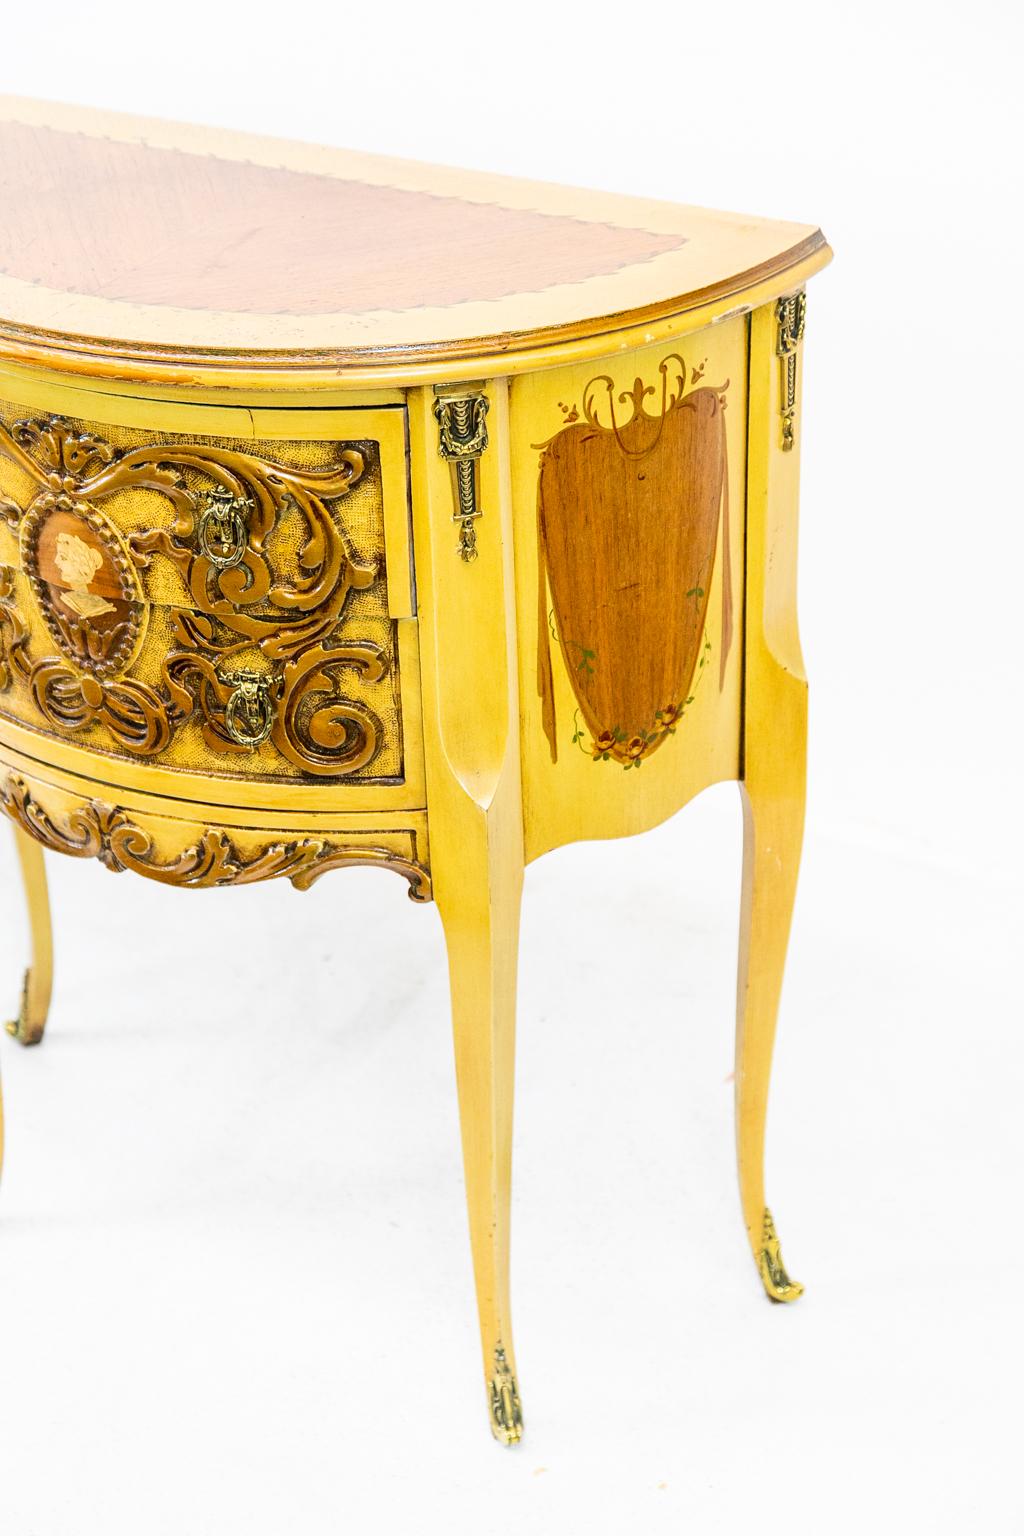 Pair of carved demilune side tables are American made in the French style. There are carved leaf arabesques on the front and book matched walnut herringbone pattern on the tops. Cast brass ornamentation is at the top and feet of all four legs.
 